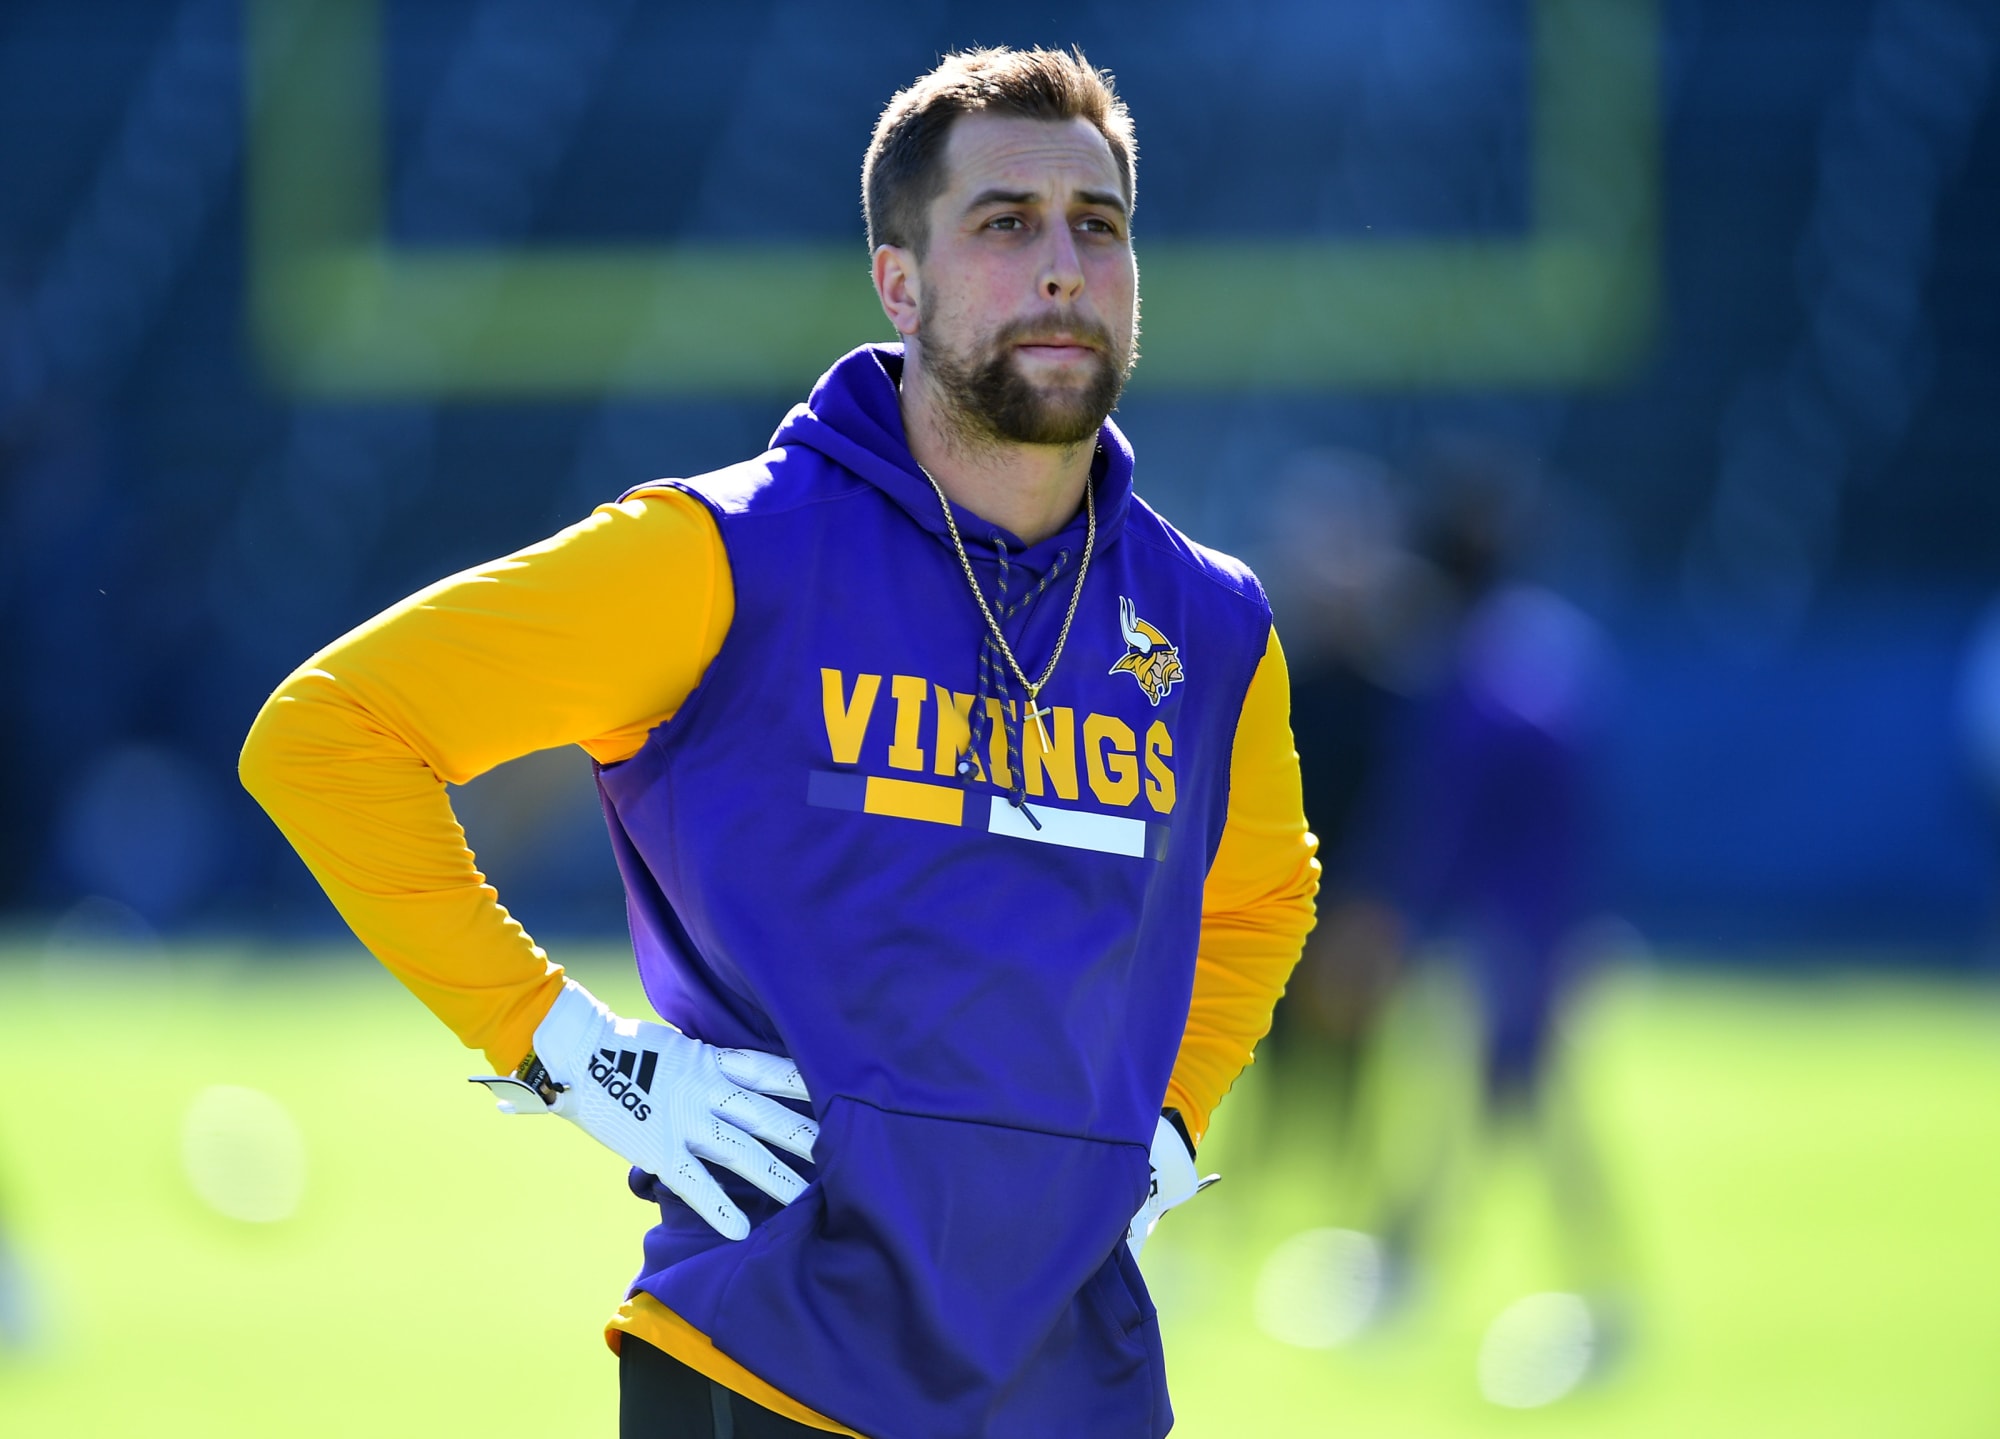 Have we already seen the best Adam Thielen has to offer?